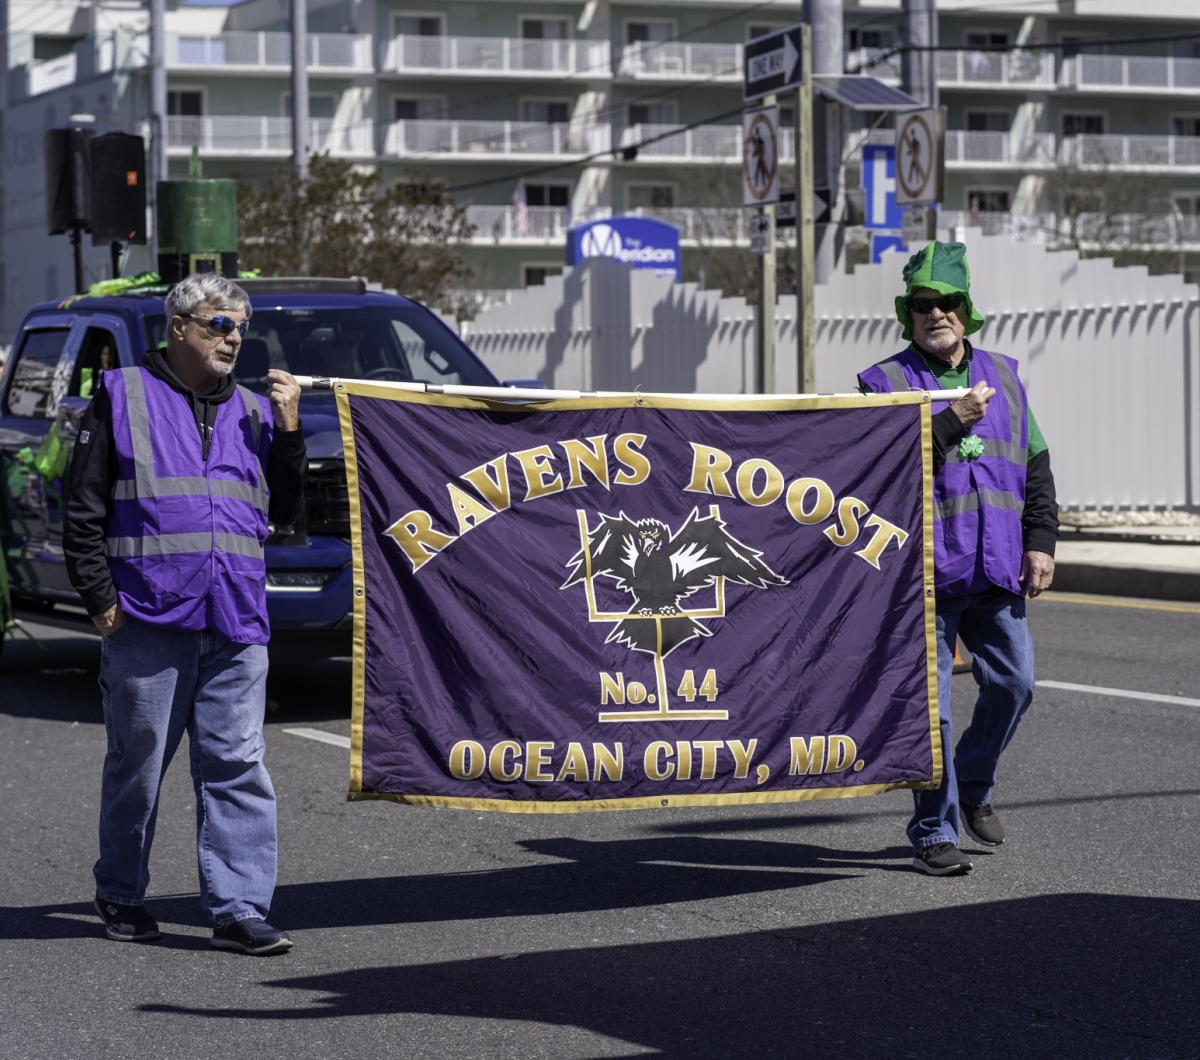 Ravens Roost banner in the parade